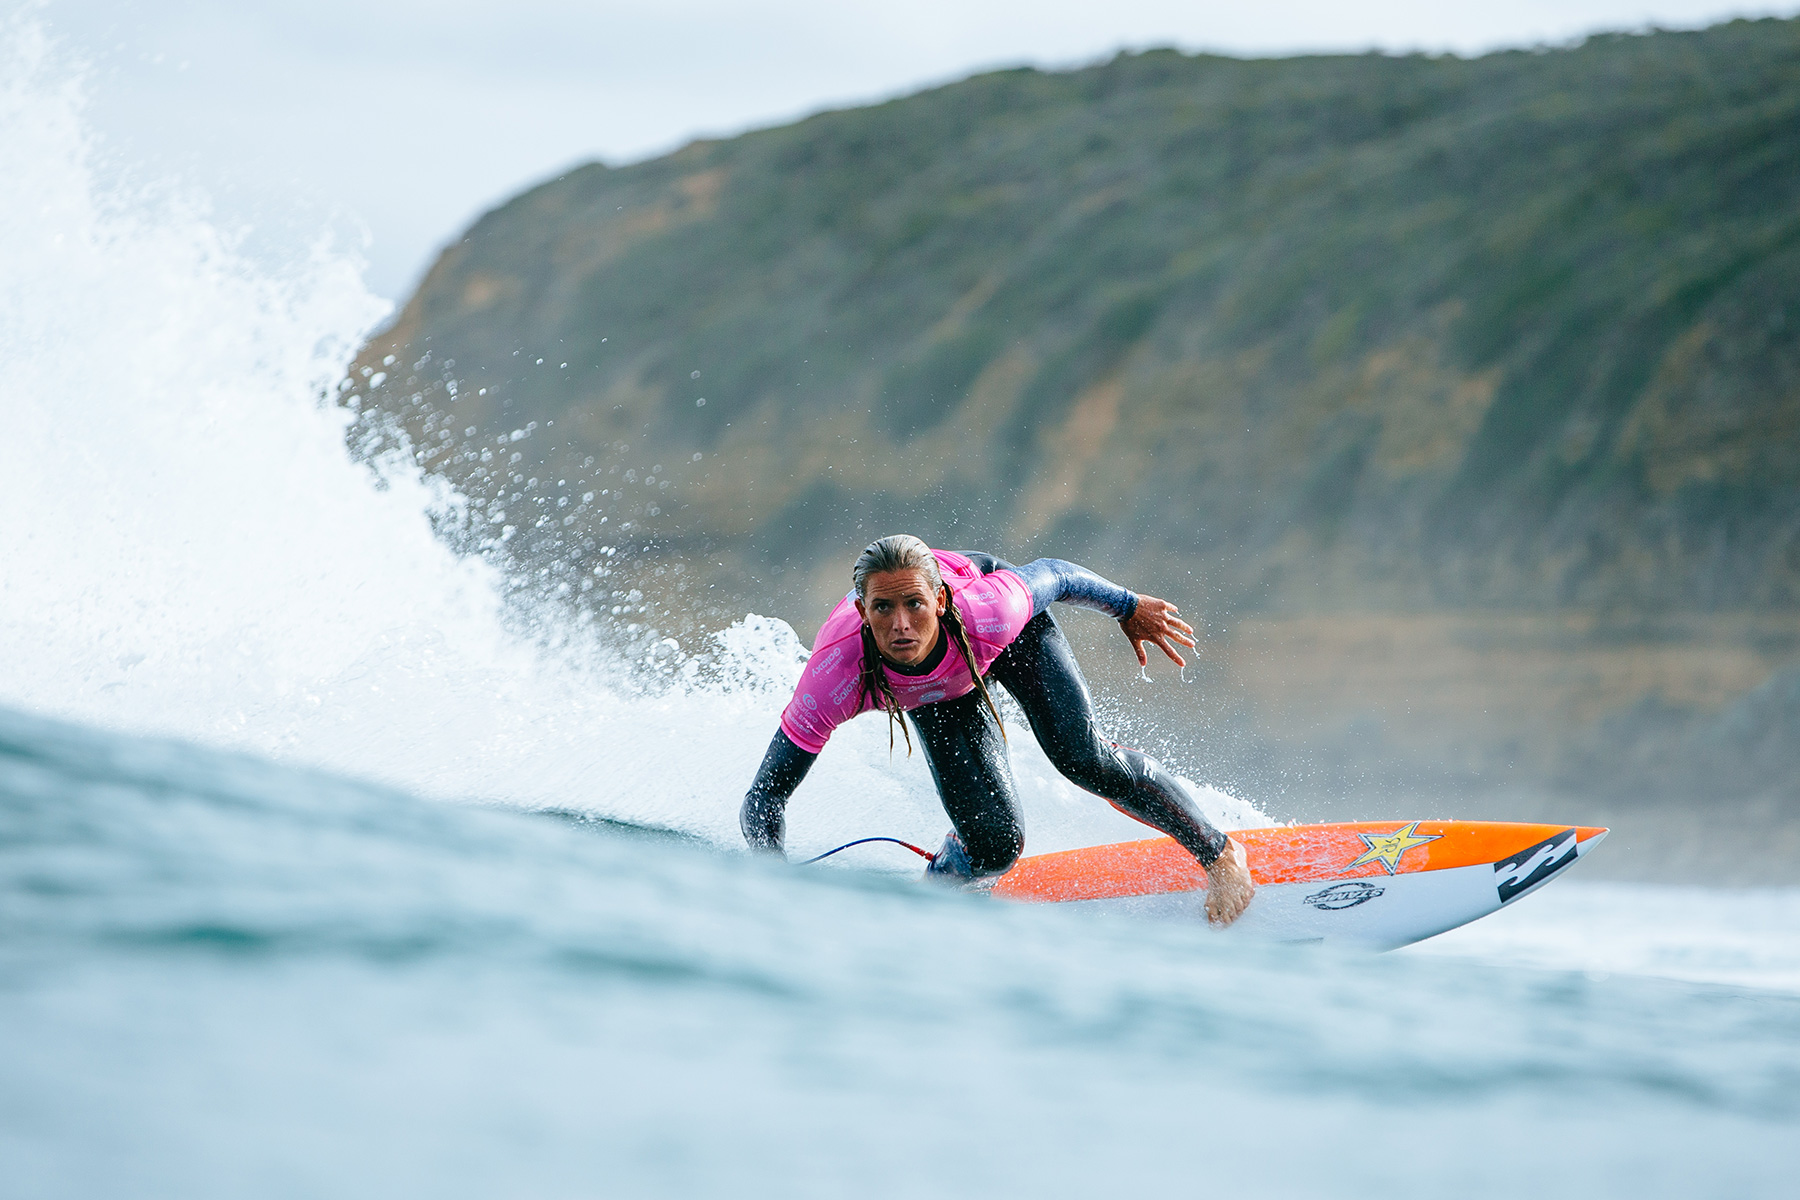 Surfing the East Coast With World's Top Women Surfers